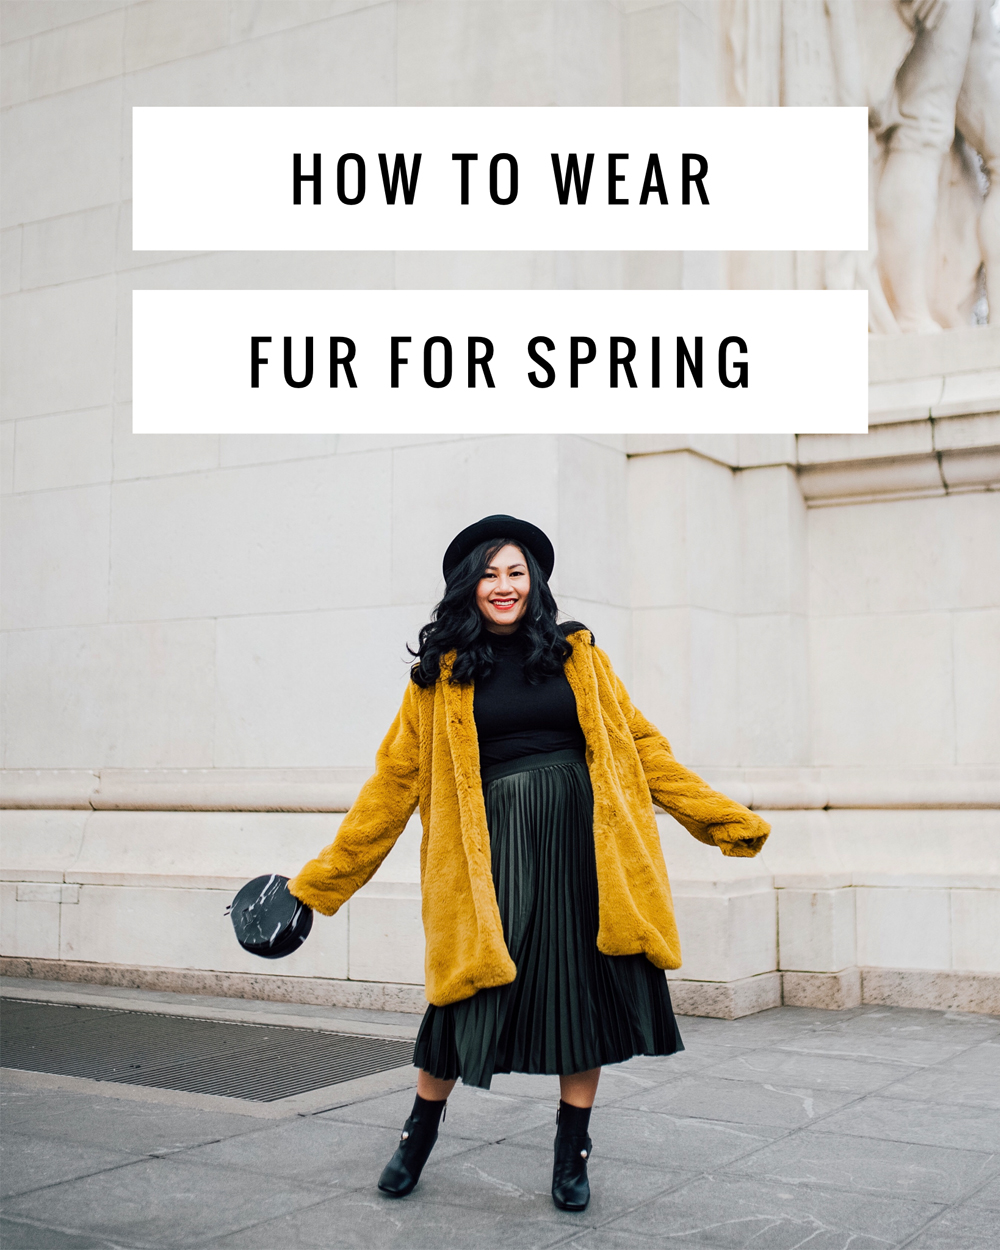 How to wear fur for spring